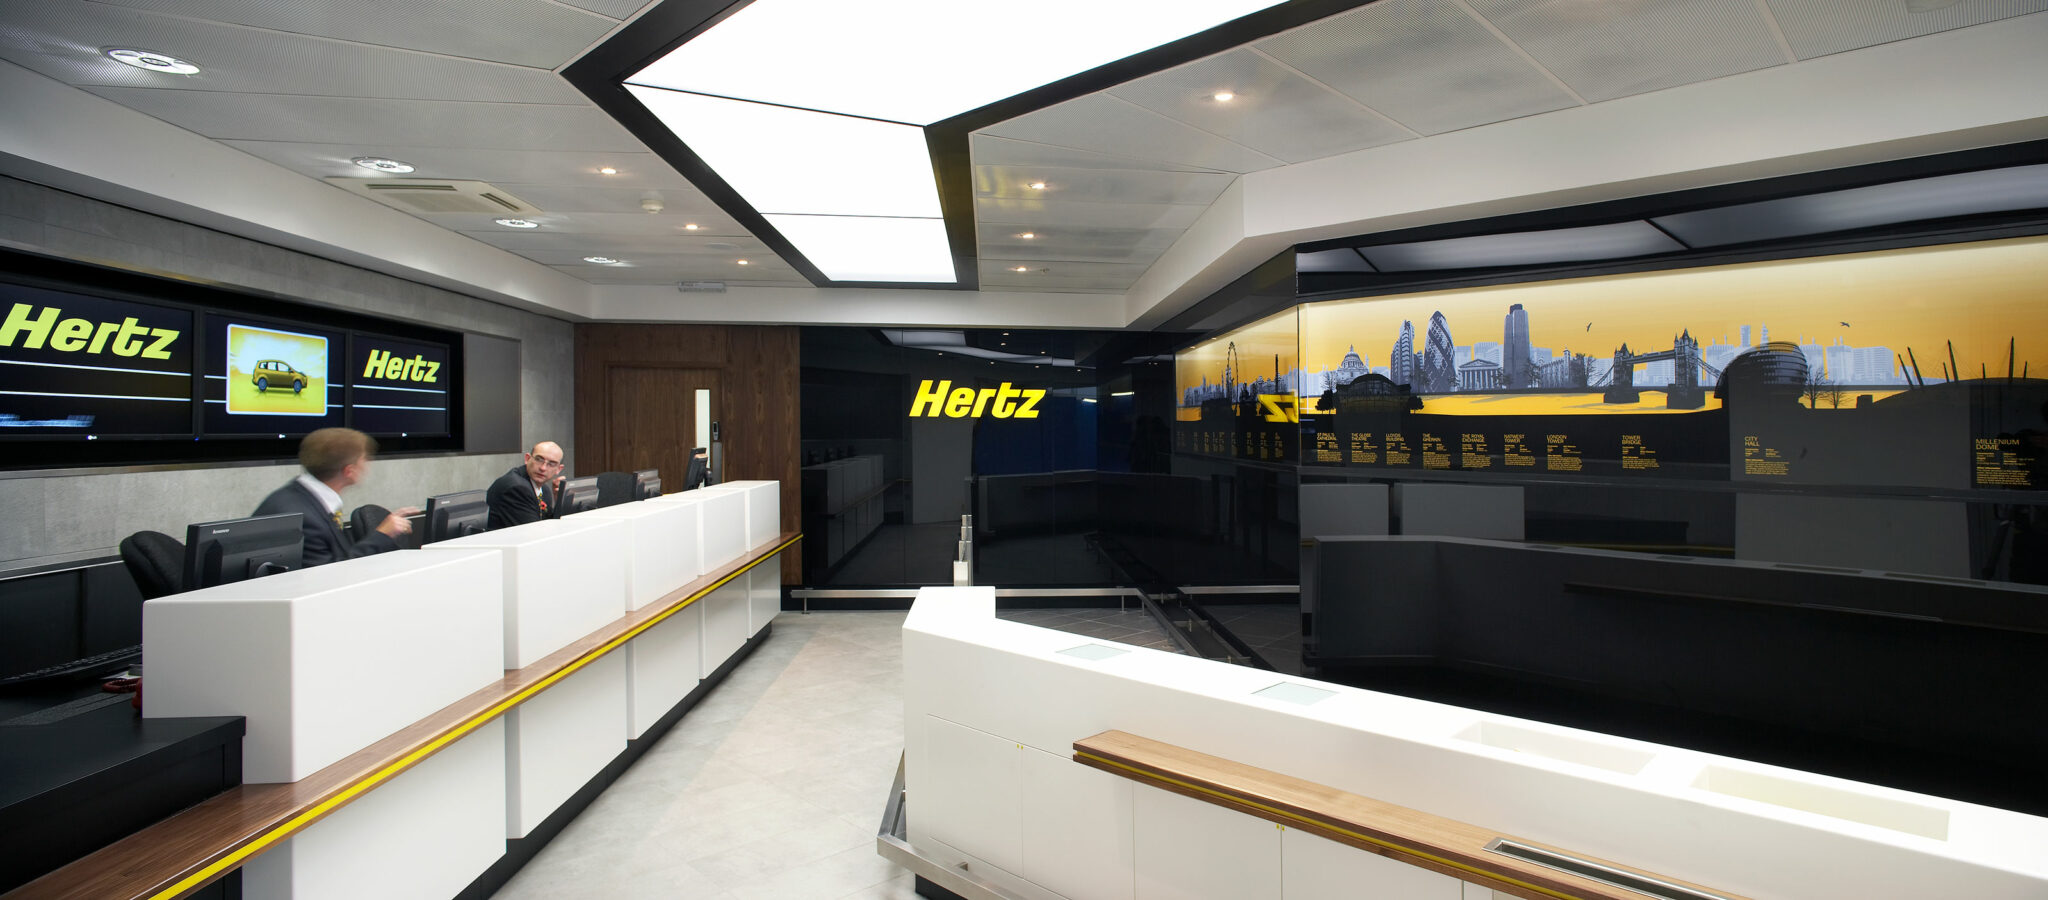 Hertz Standsted Environment